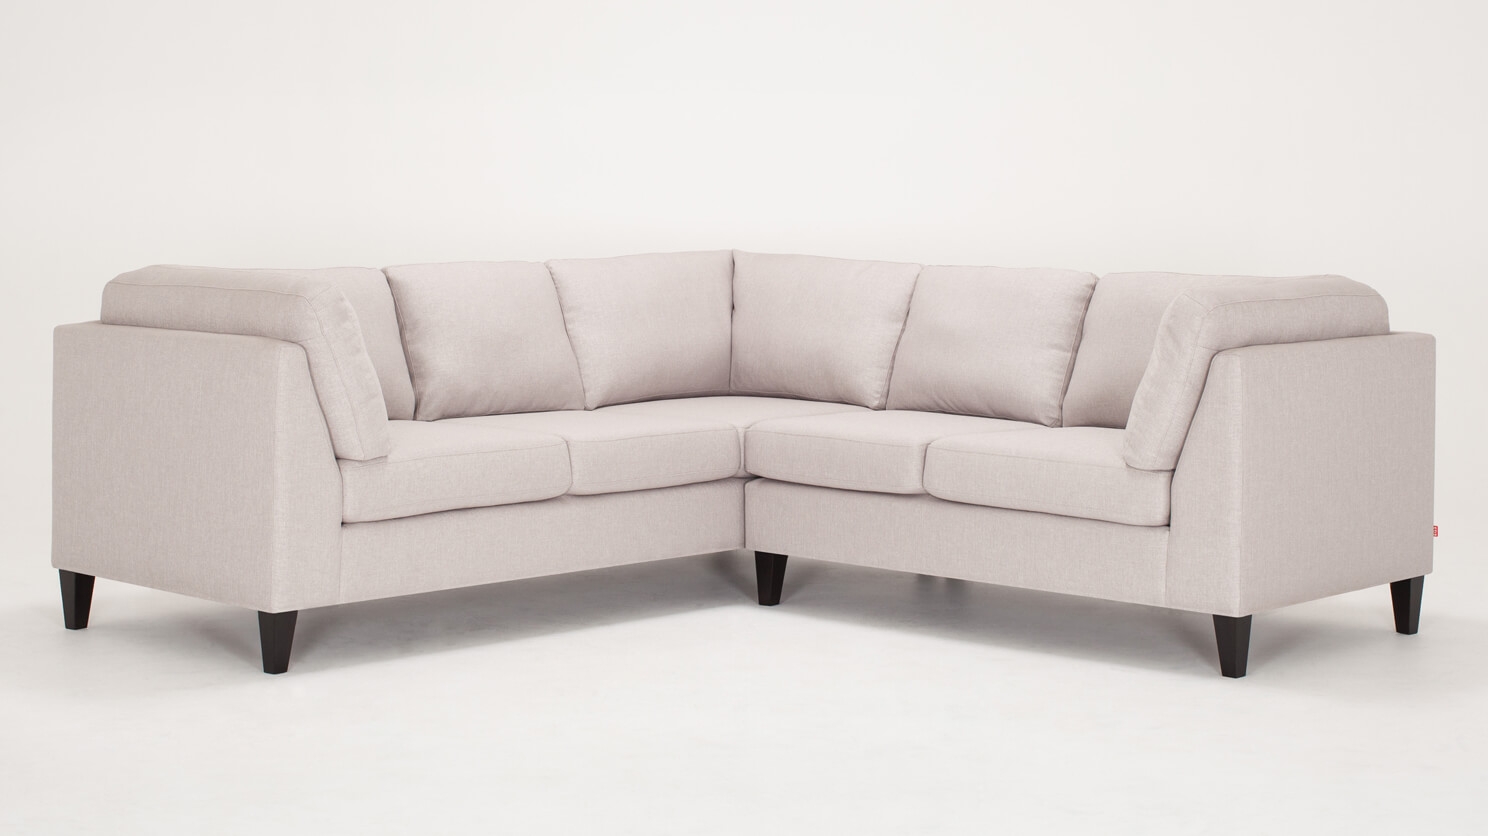 eq3 sectional sofa bed